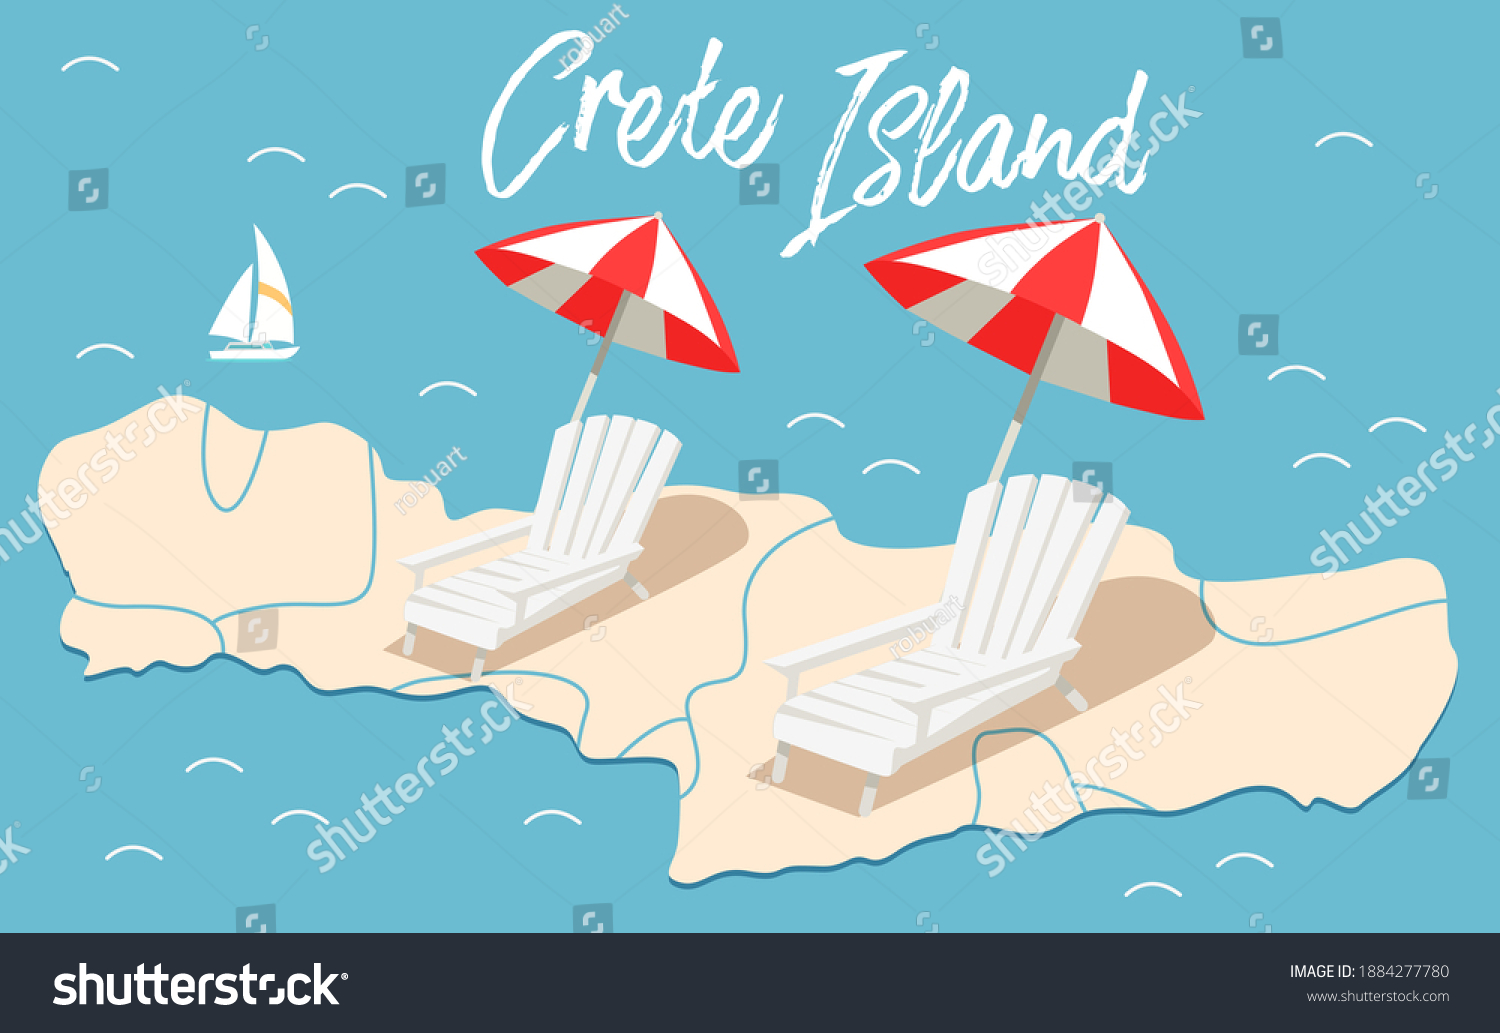 SVG of Items for recreation at sea or ocean. Sun loungers and parasols for sunbathing and relaxing on beach. A pair of beach accessories vector illustration. Crete island travel map surrounded by water svg